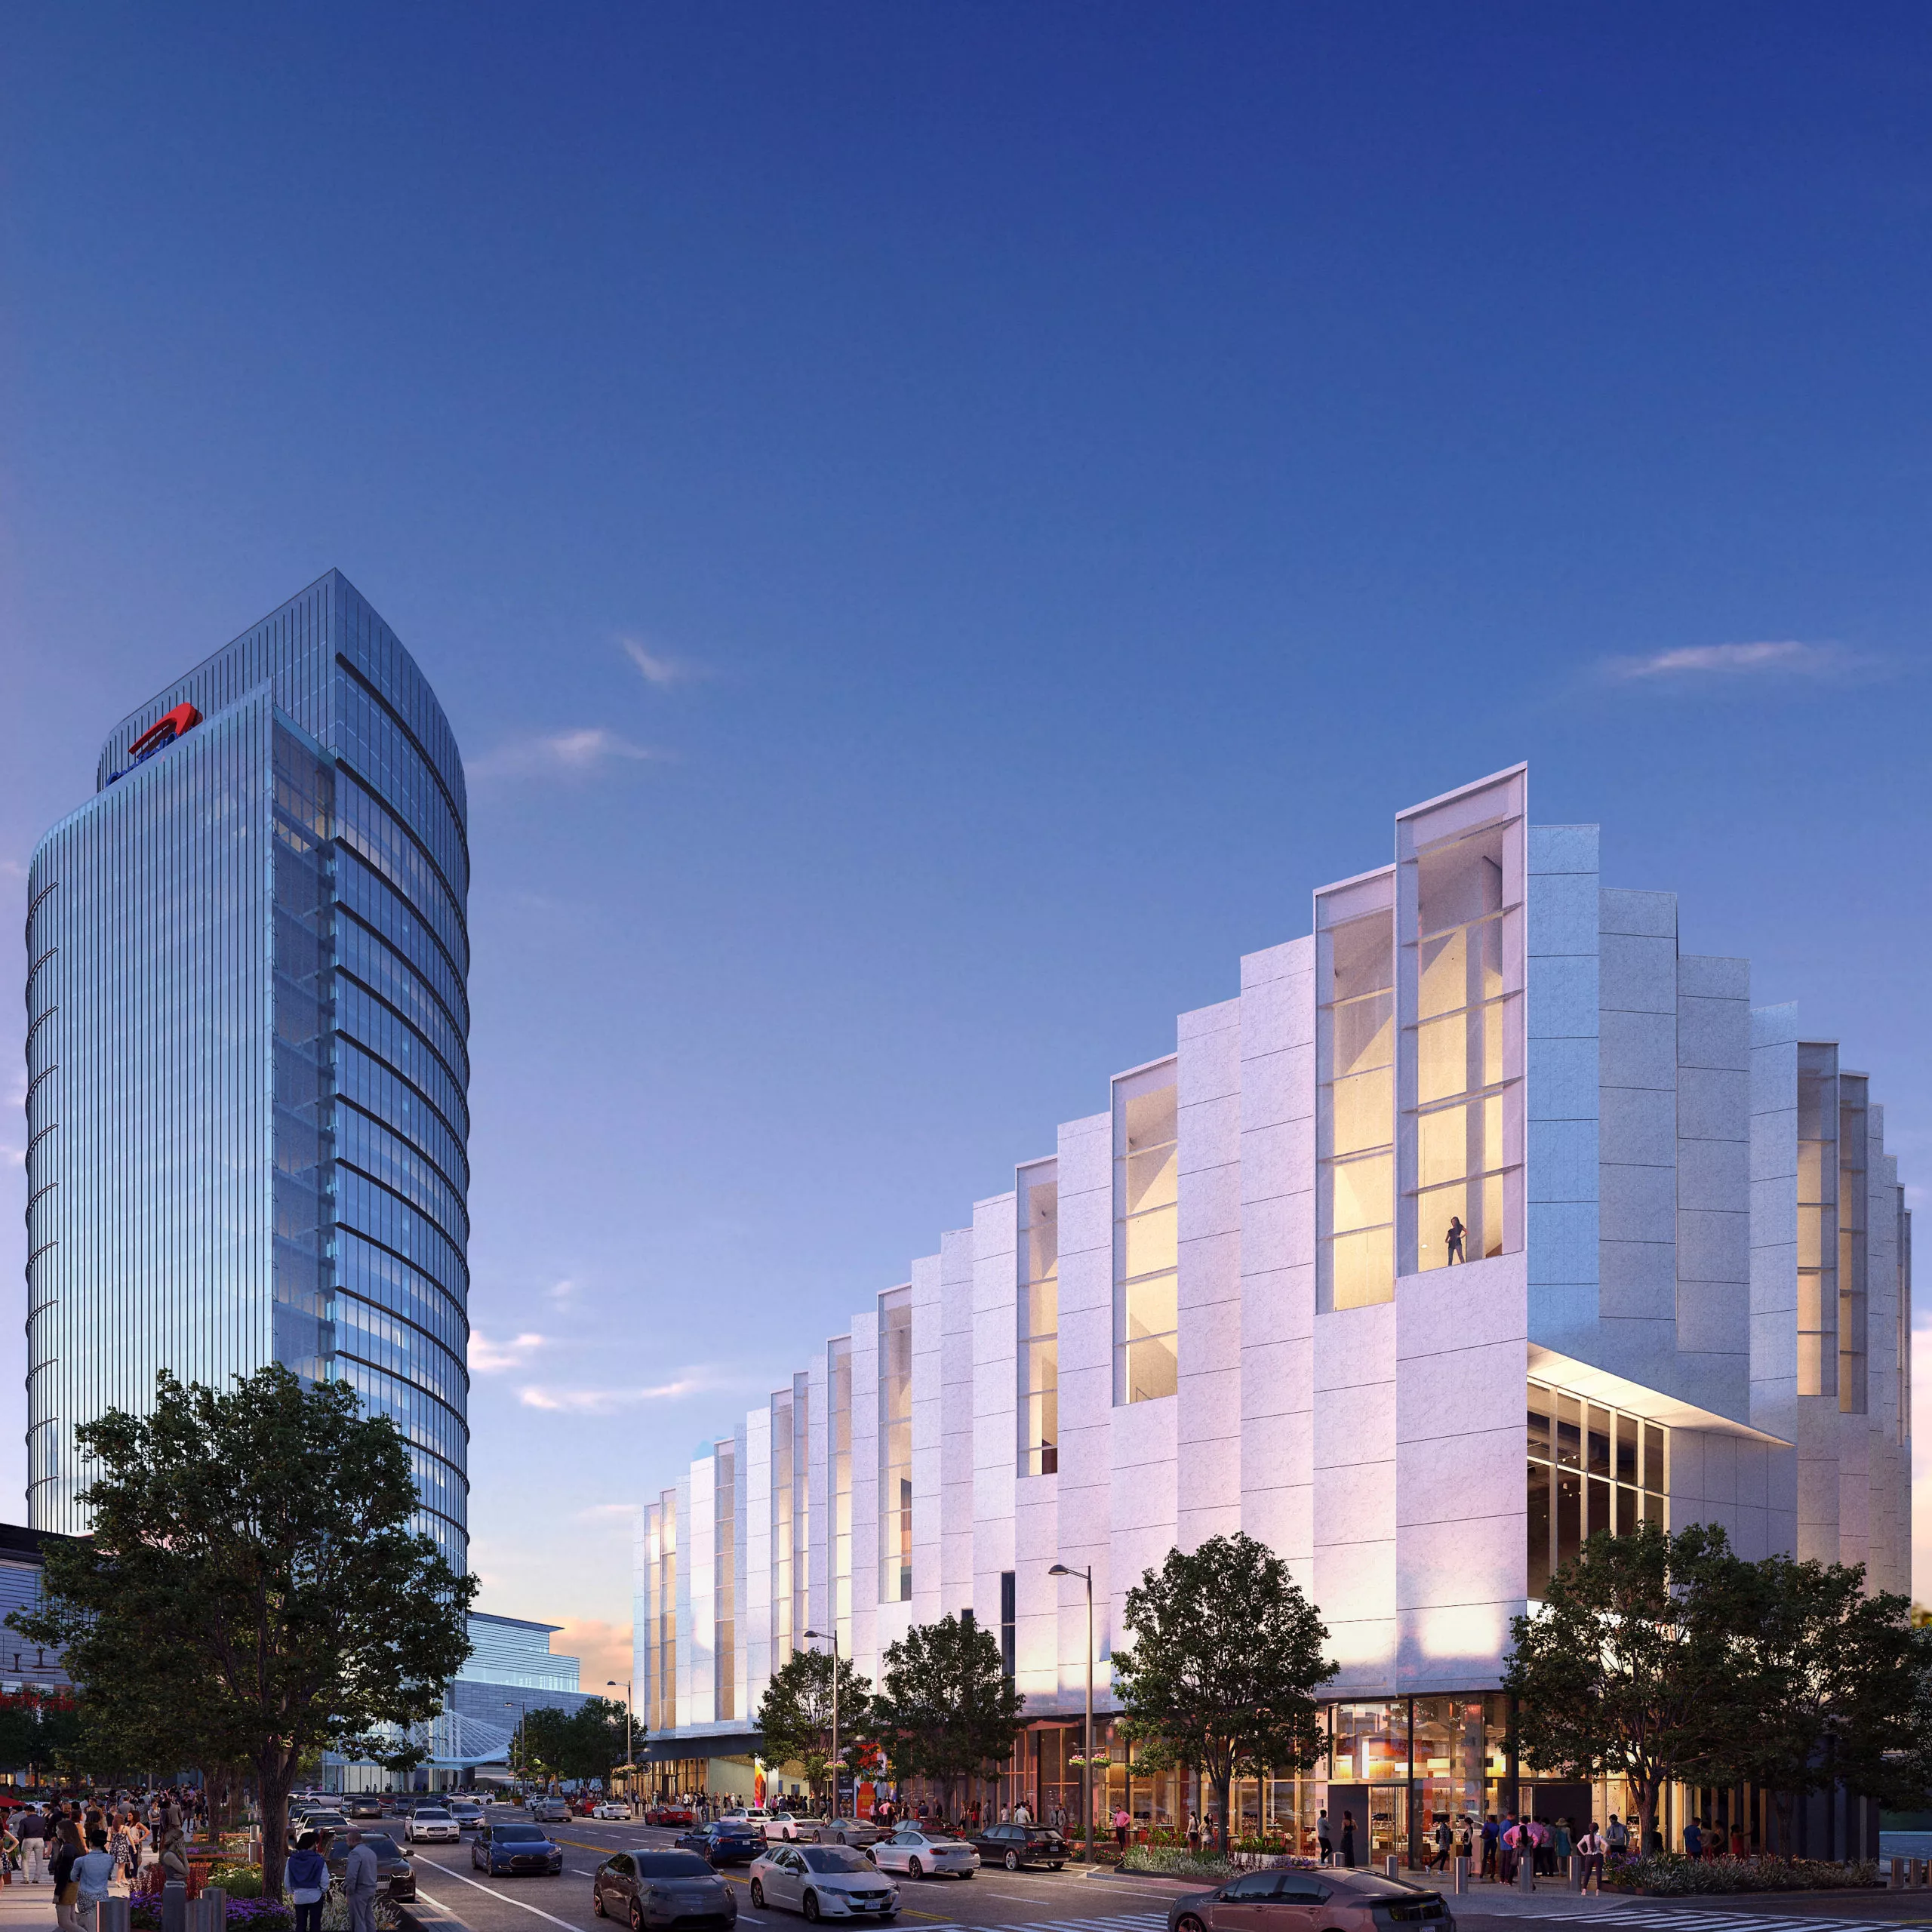 County board approves vehicle sales at Tysons Corner Center